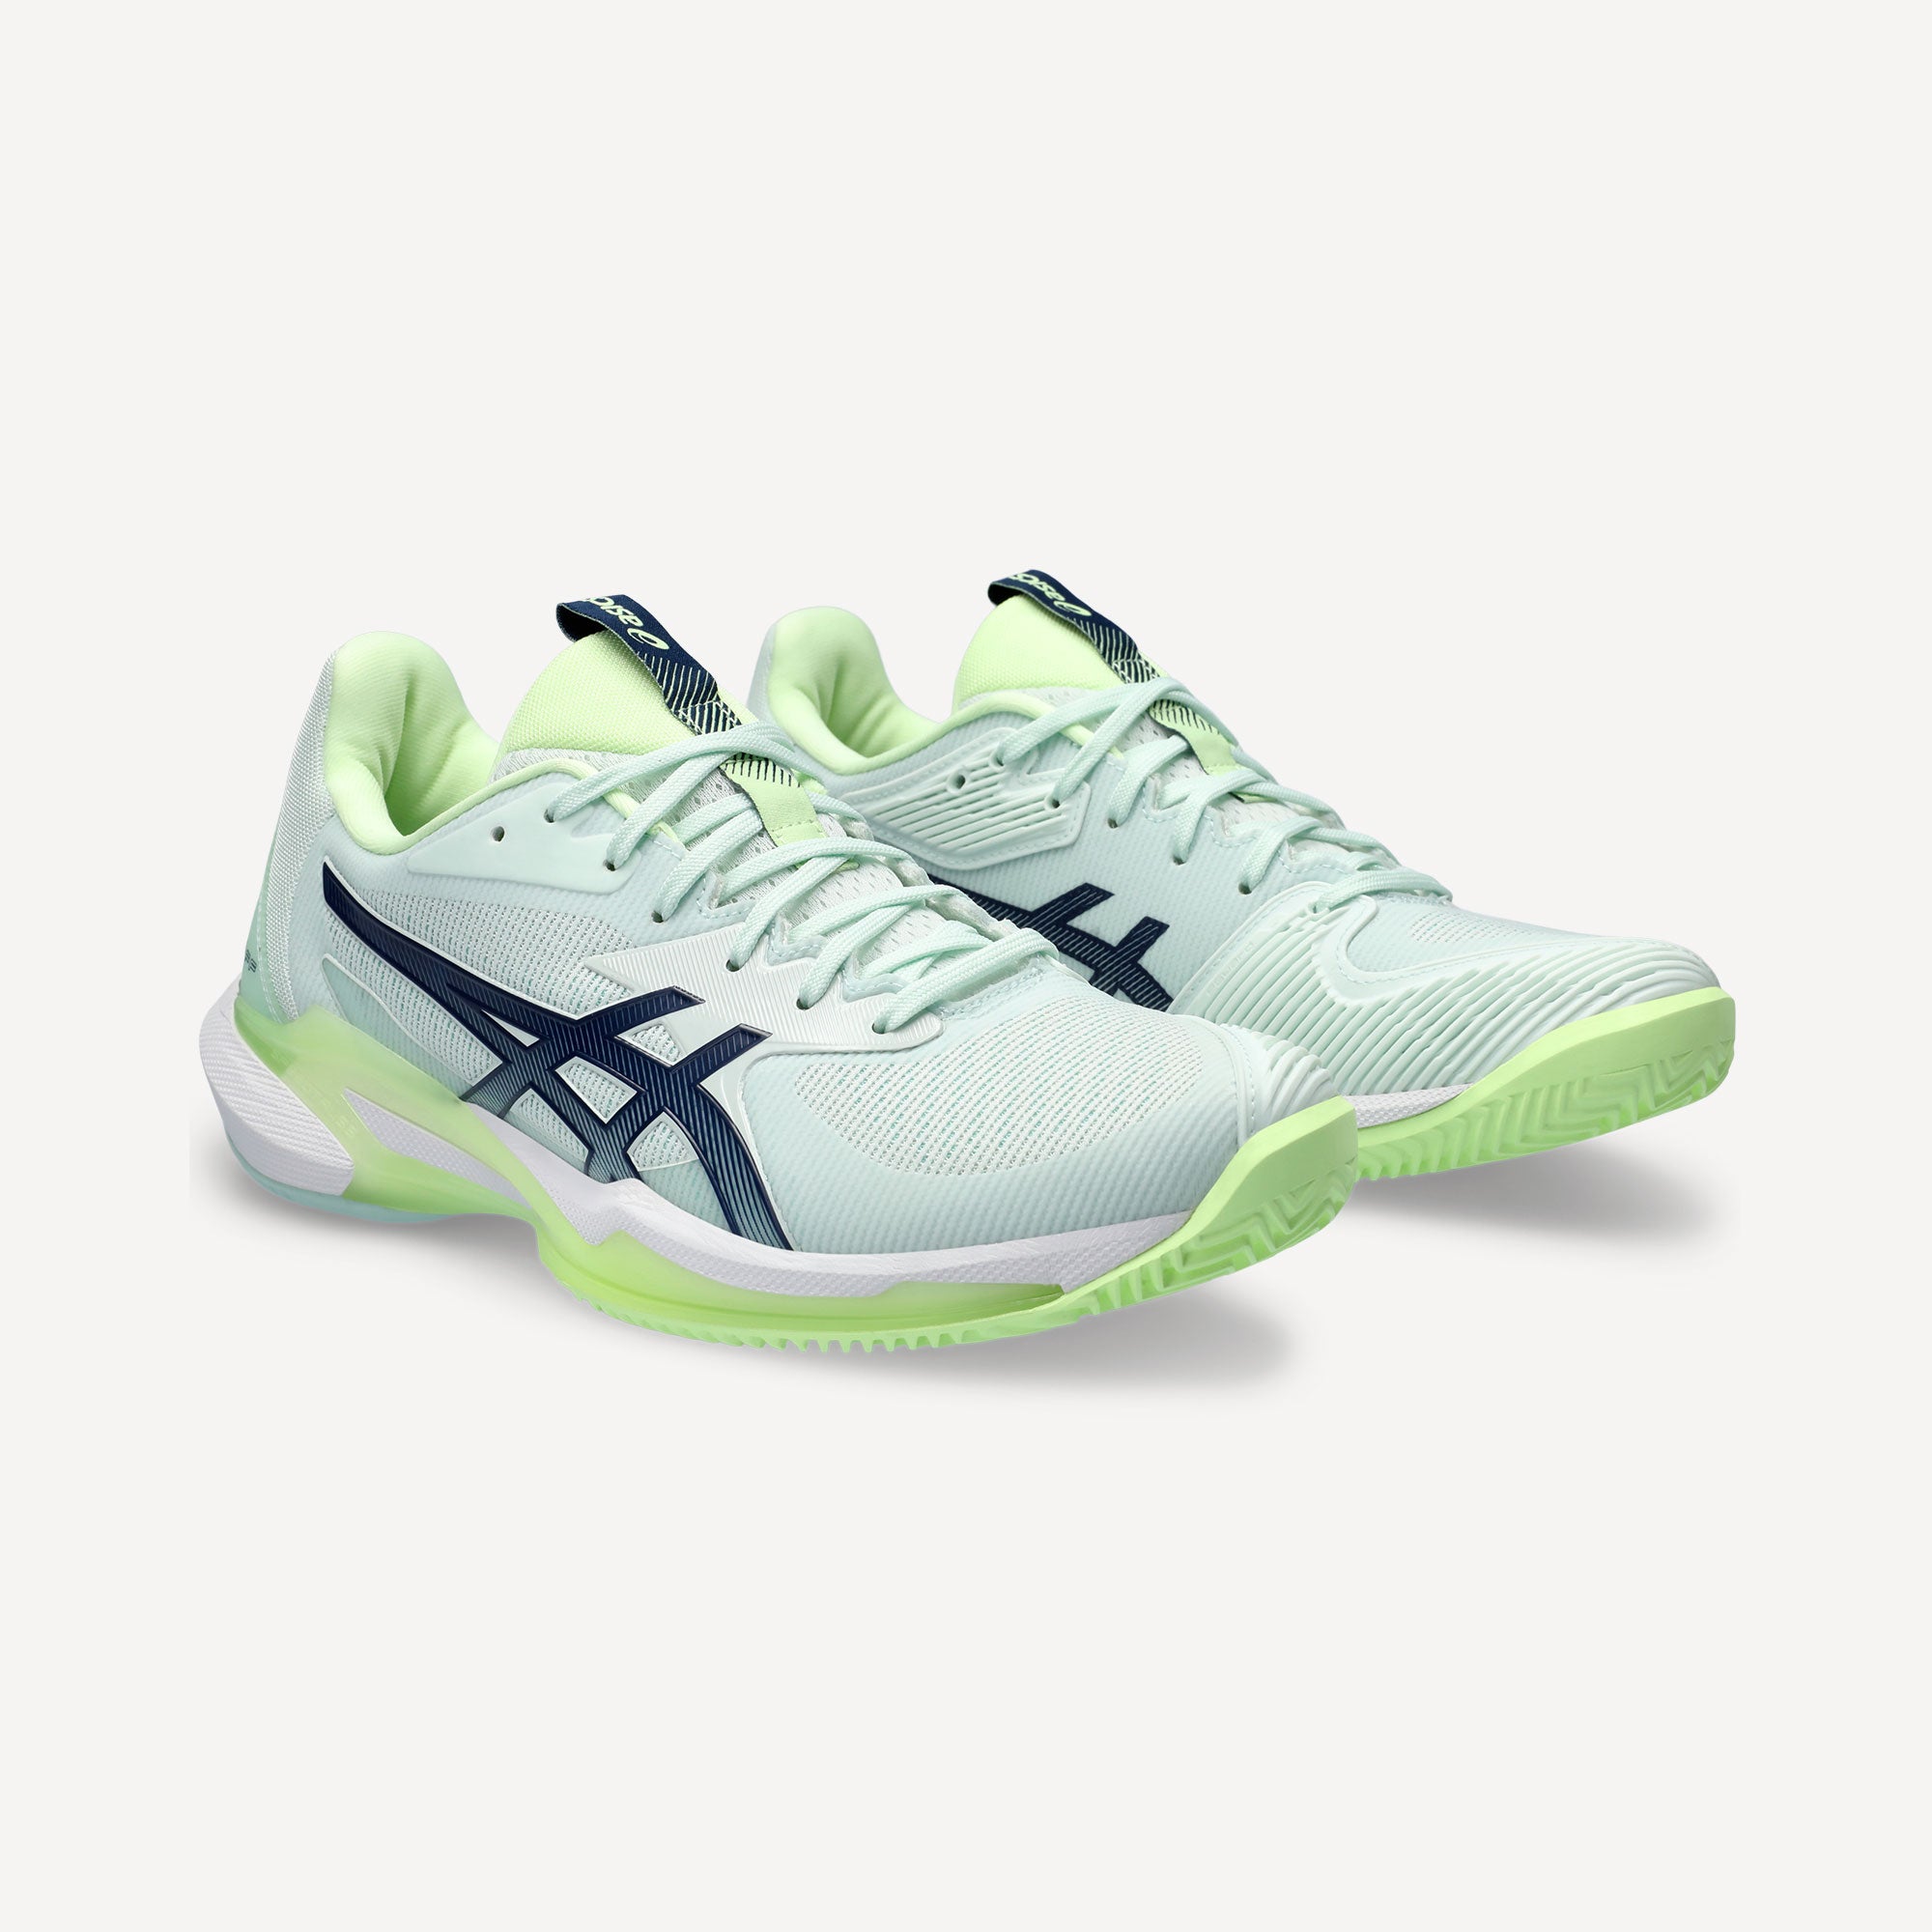 ASICS Solution Speed FF 3 Women's Clay Court Tennis Shoes - Green (4)